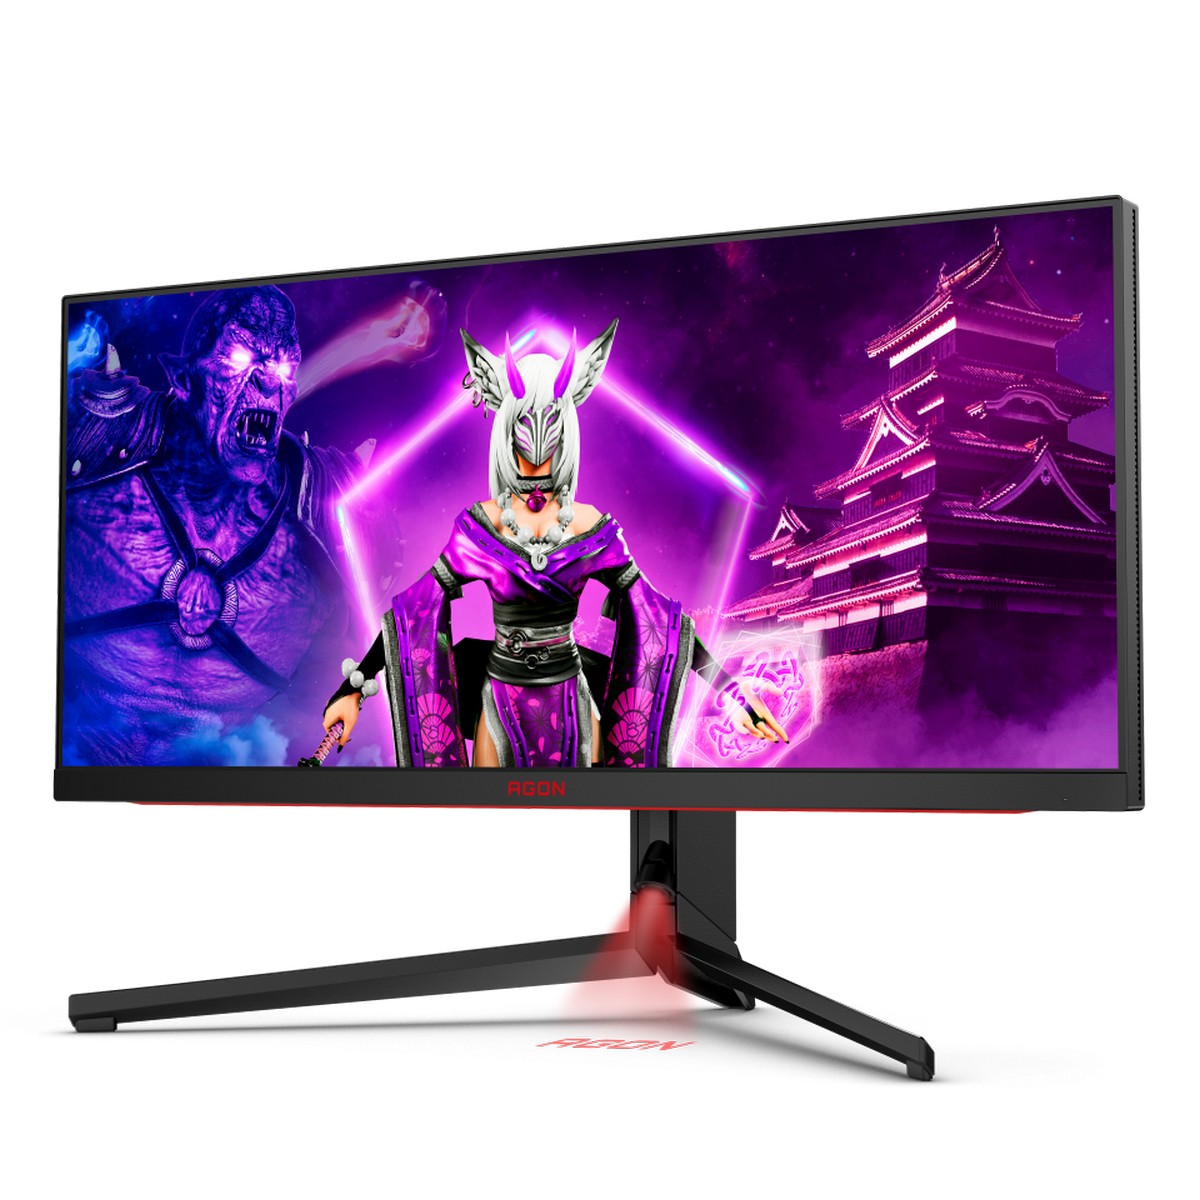 Save $170 on this 28-inch 4K 144Hz monitor with HDMI 2.1 for PC and console  gaming